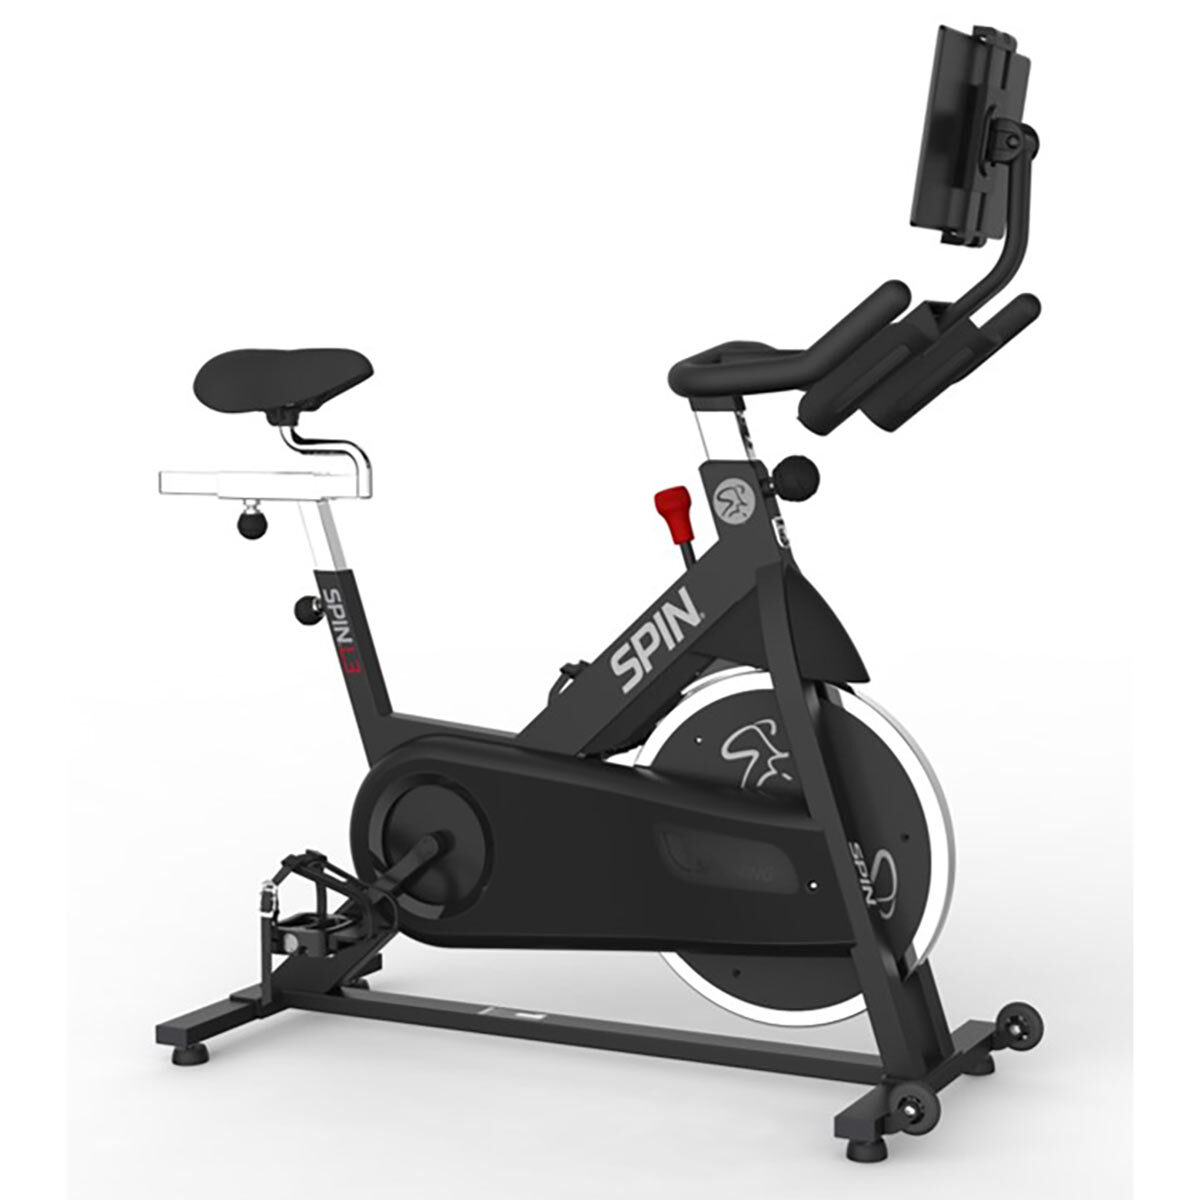 spd pedals for spin bike